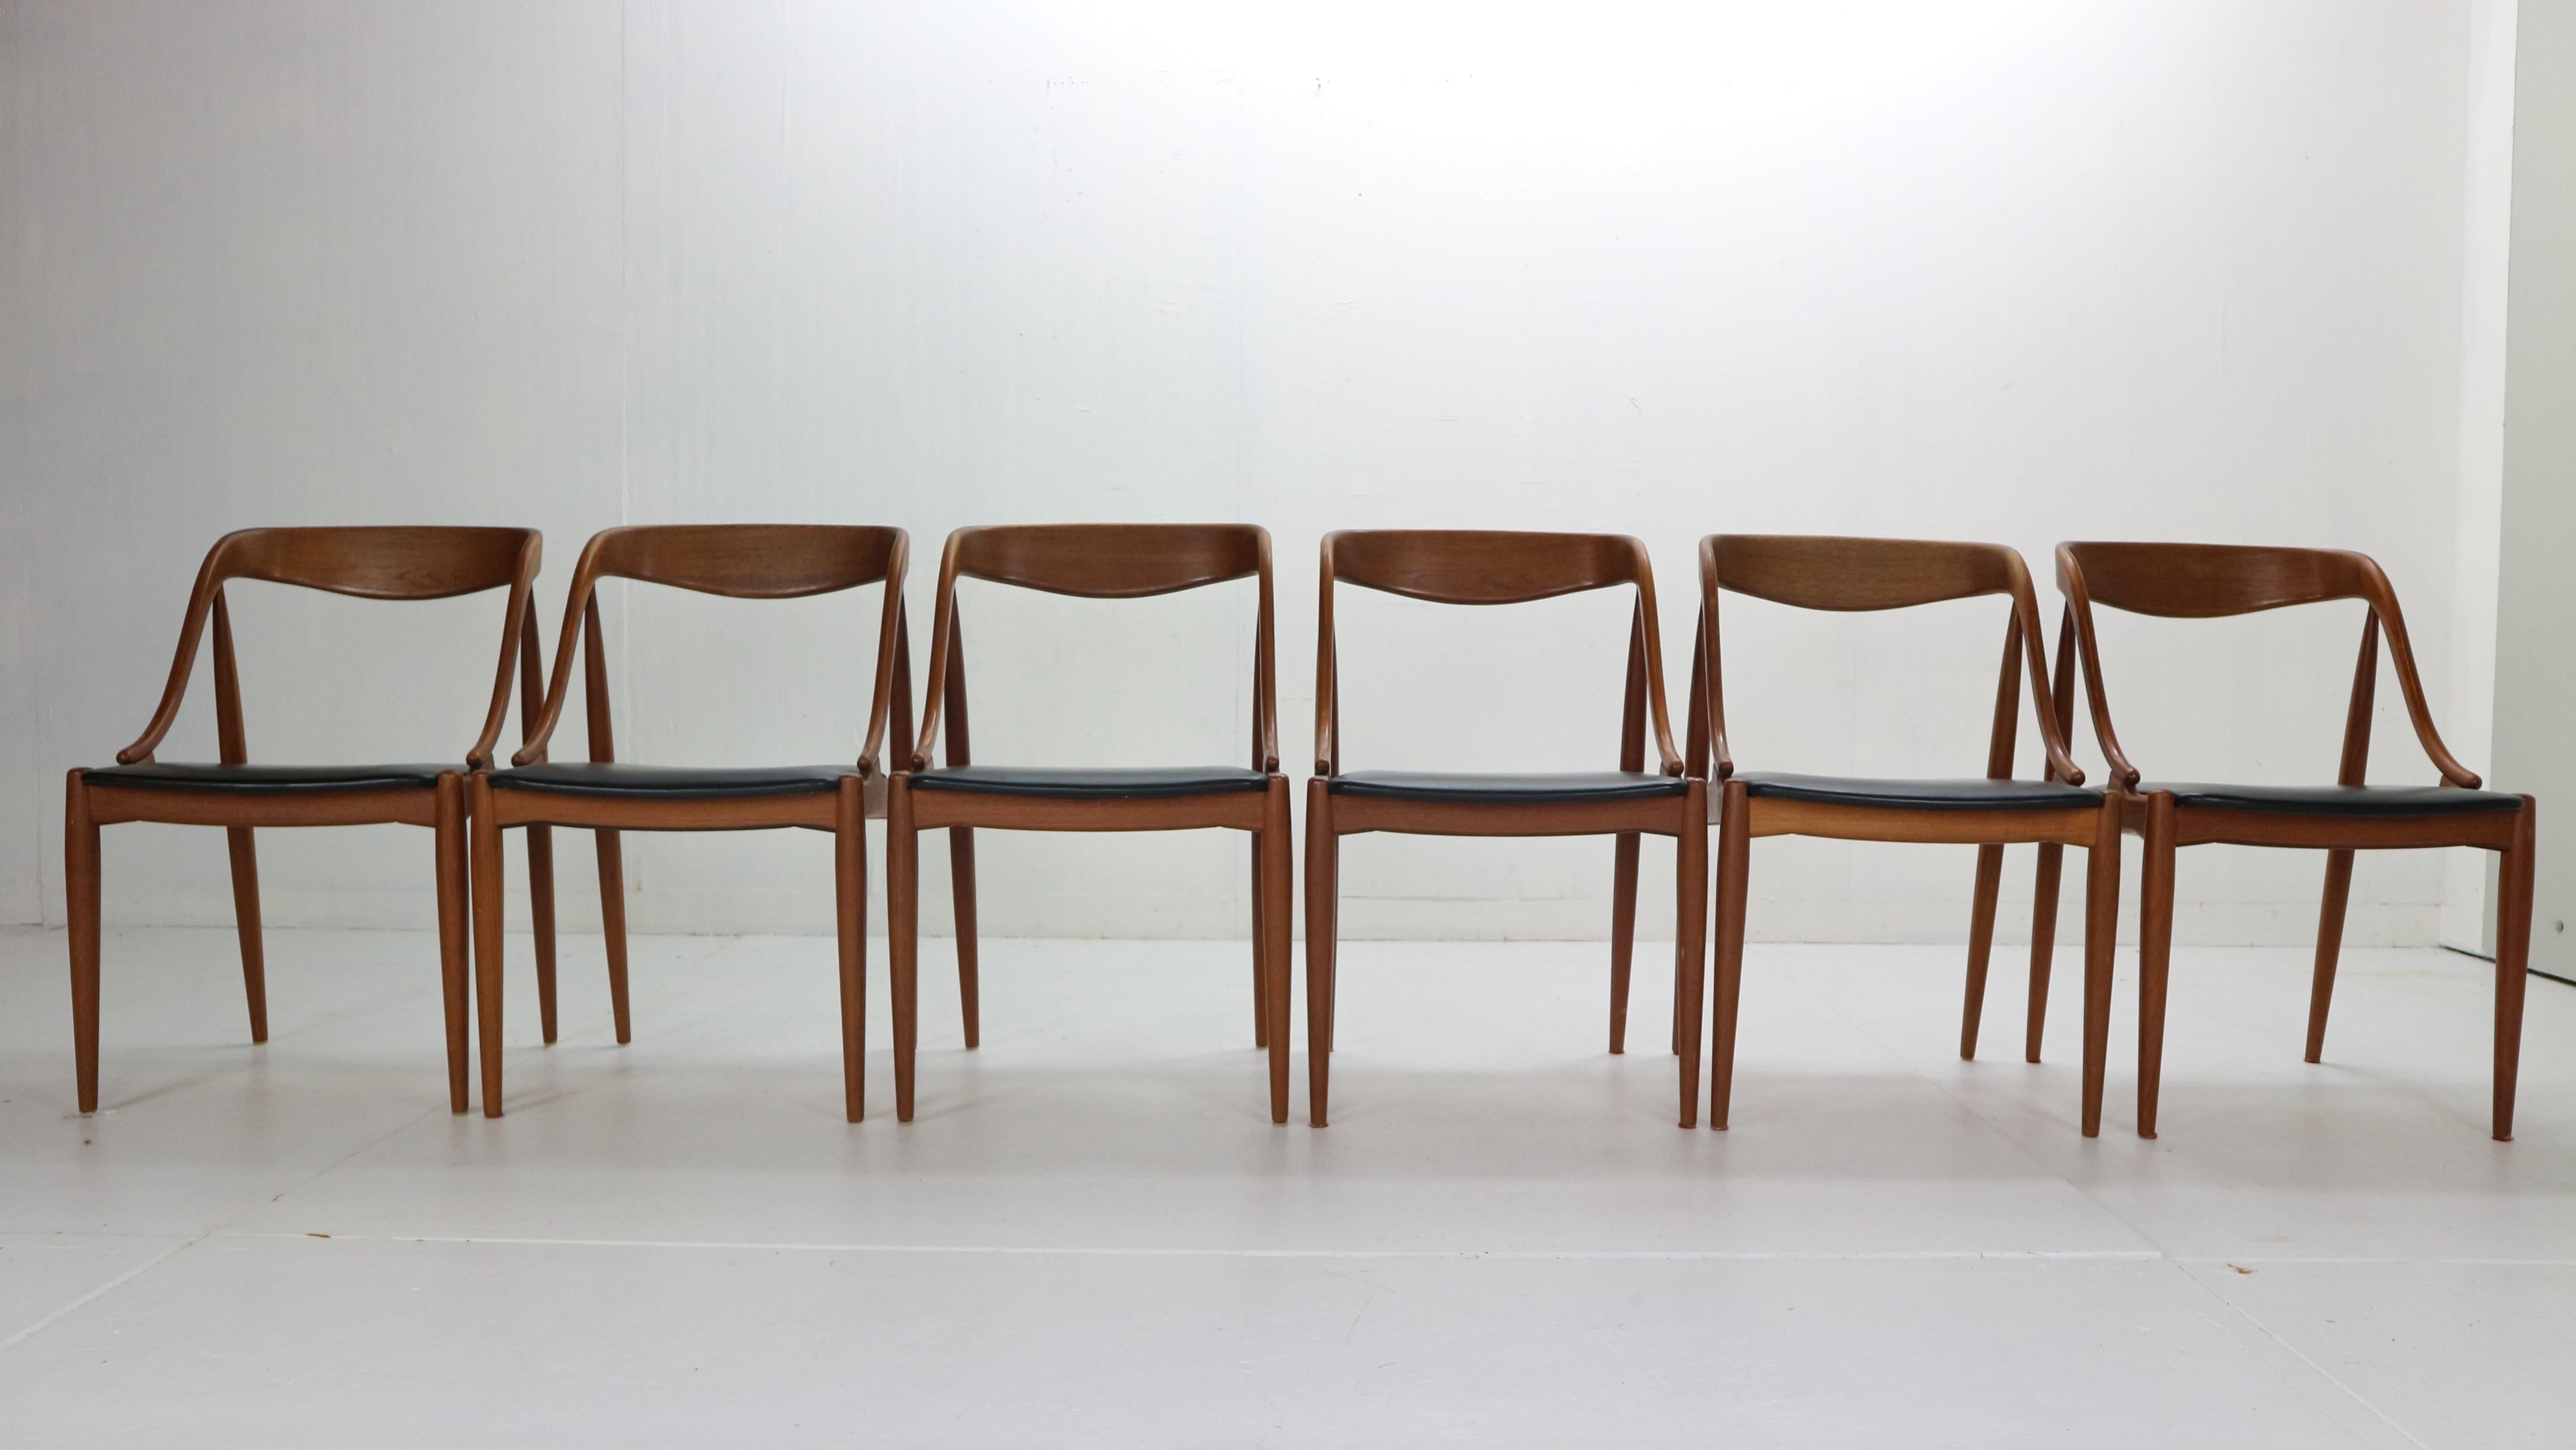 Beautiful set of six dinning room chairs designed by Johannes Andersen for Uldum Møbelfabrik, 1960s Denmark.

The chairs are made of solid teak wood frame. Organic form frame provides not only elegant Danish design but comfortable seating. 
Black